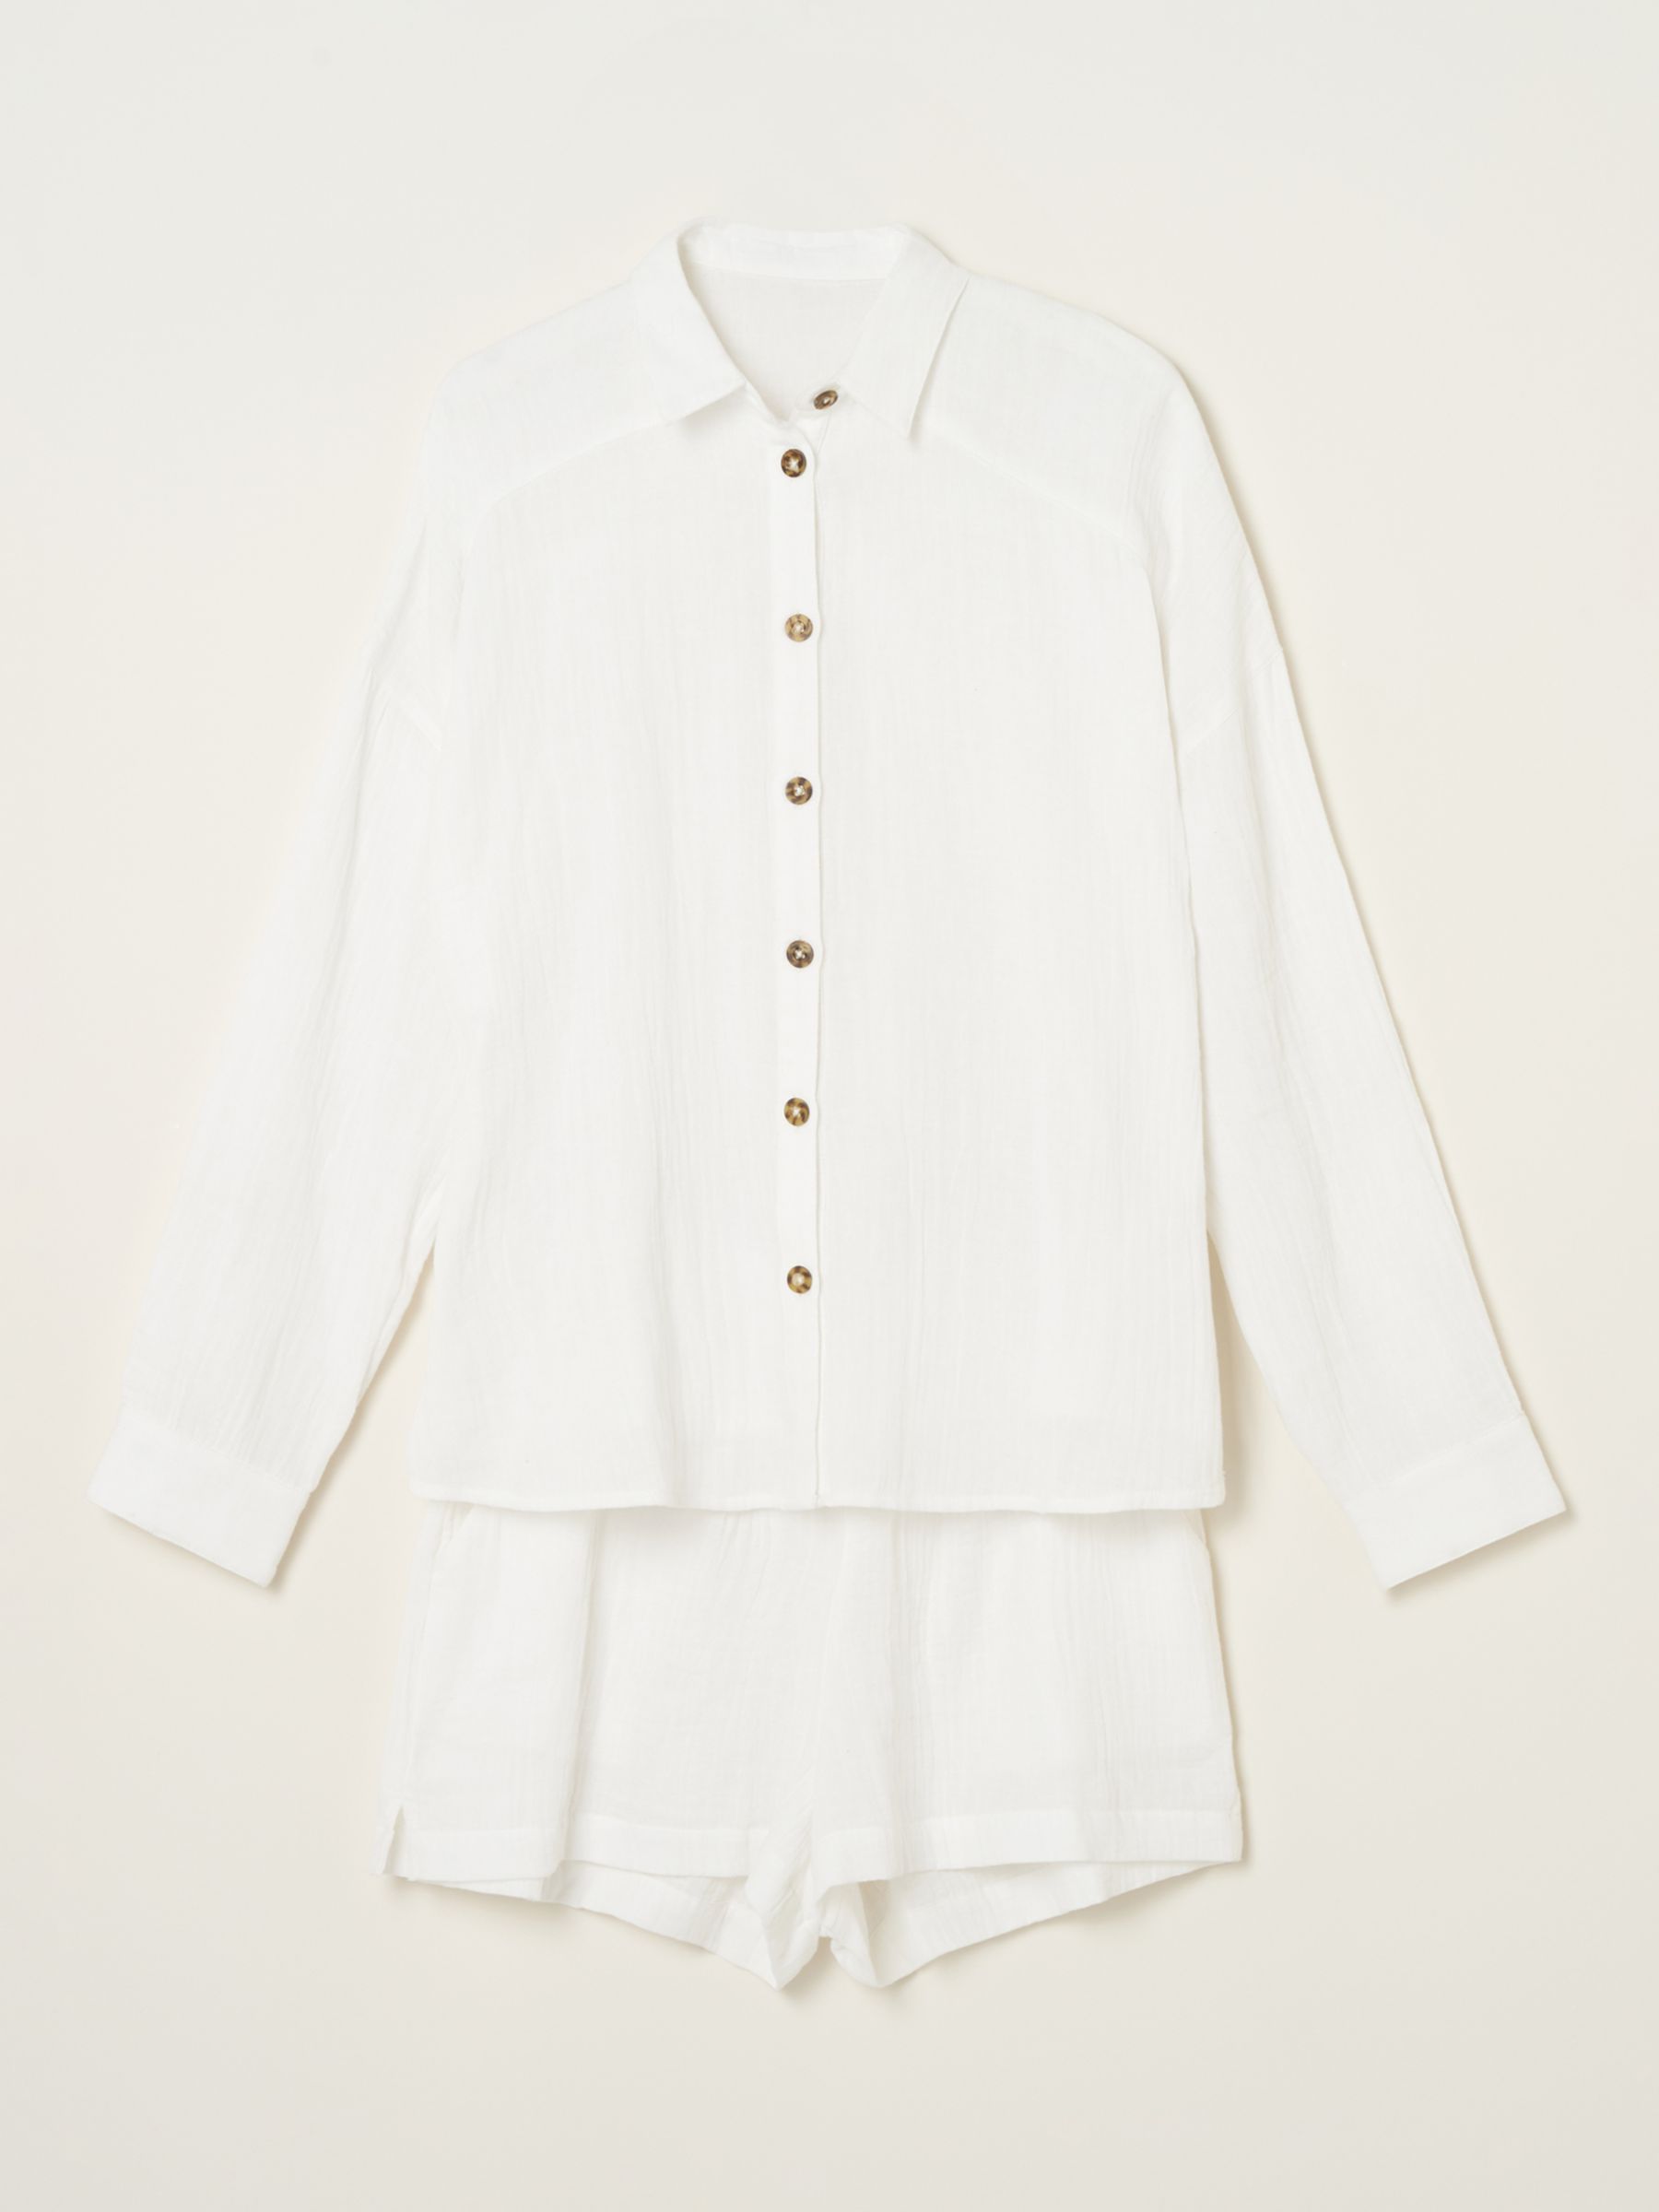 Buy Truly Cotton Cheesecloth Shirt and Shorts Set Online at johnlewis.com